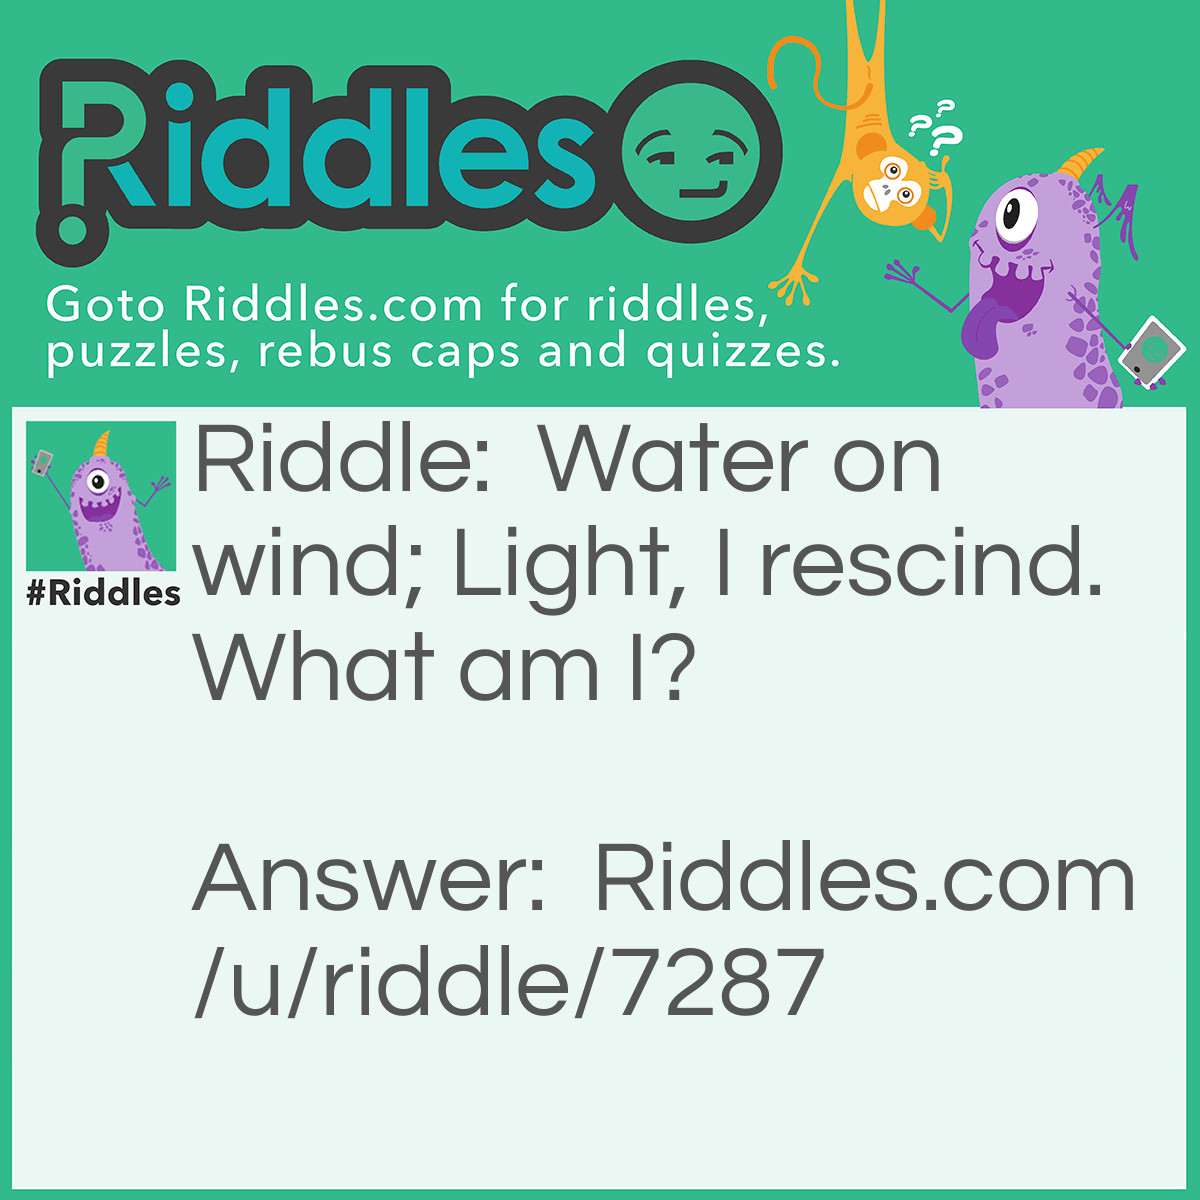 Riddle: Water on wind; Light, I rescind. What am I? Answer: A Cloud